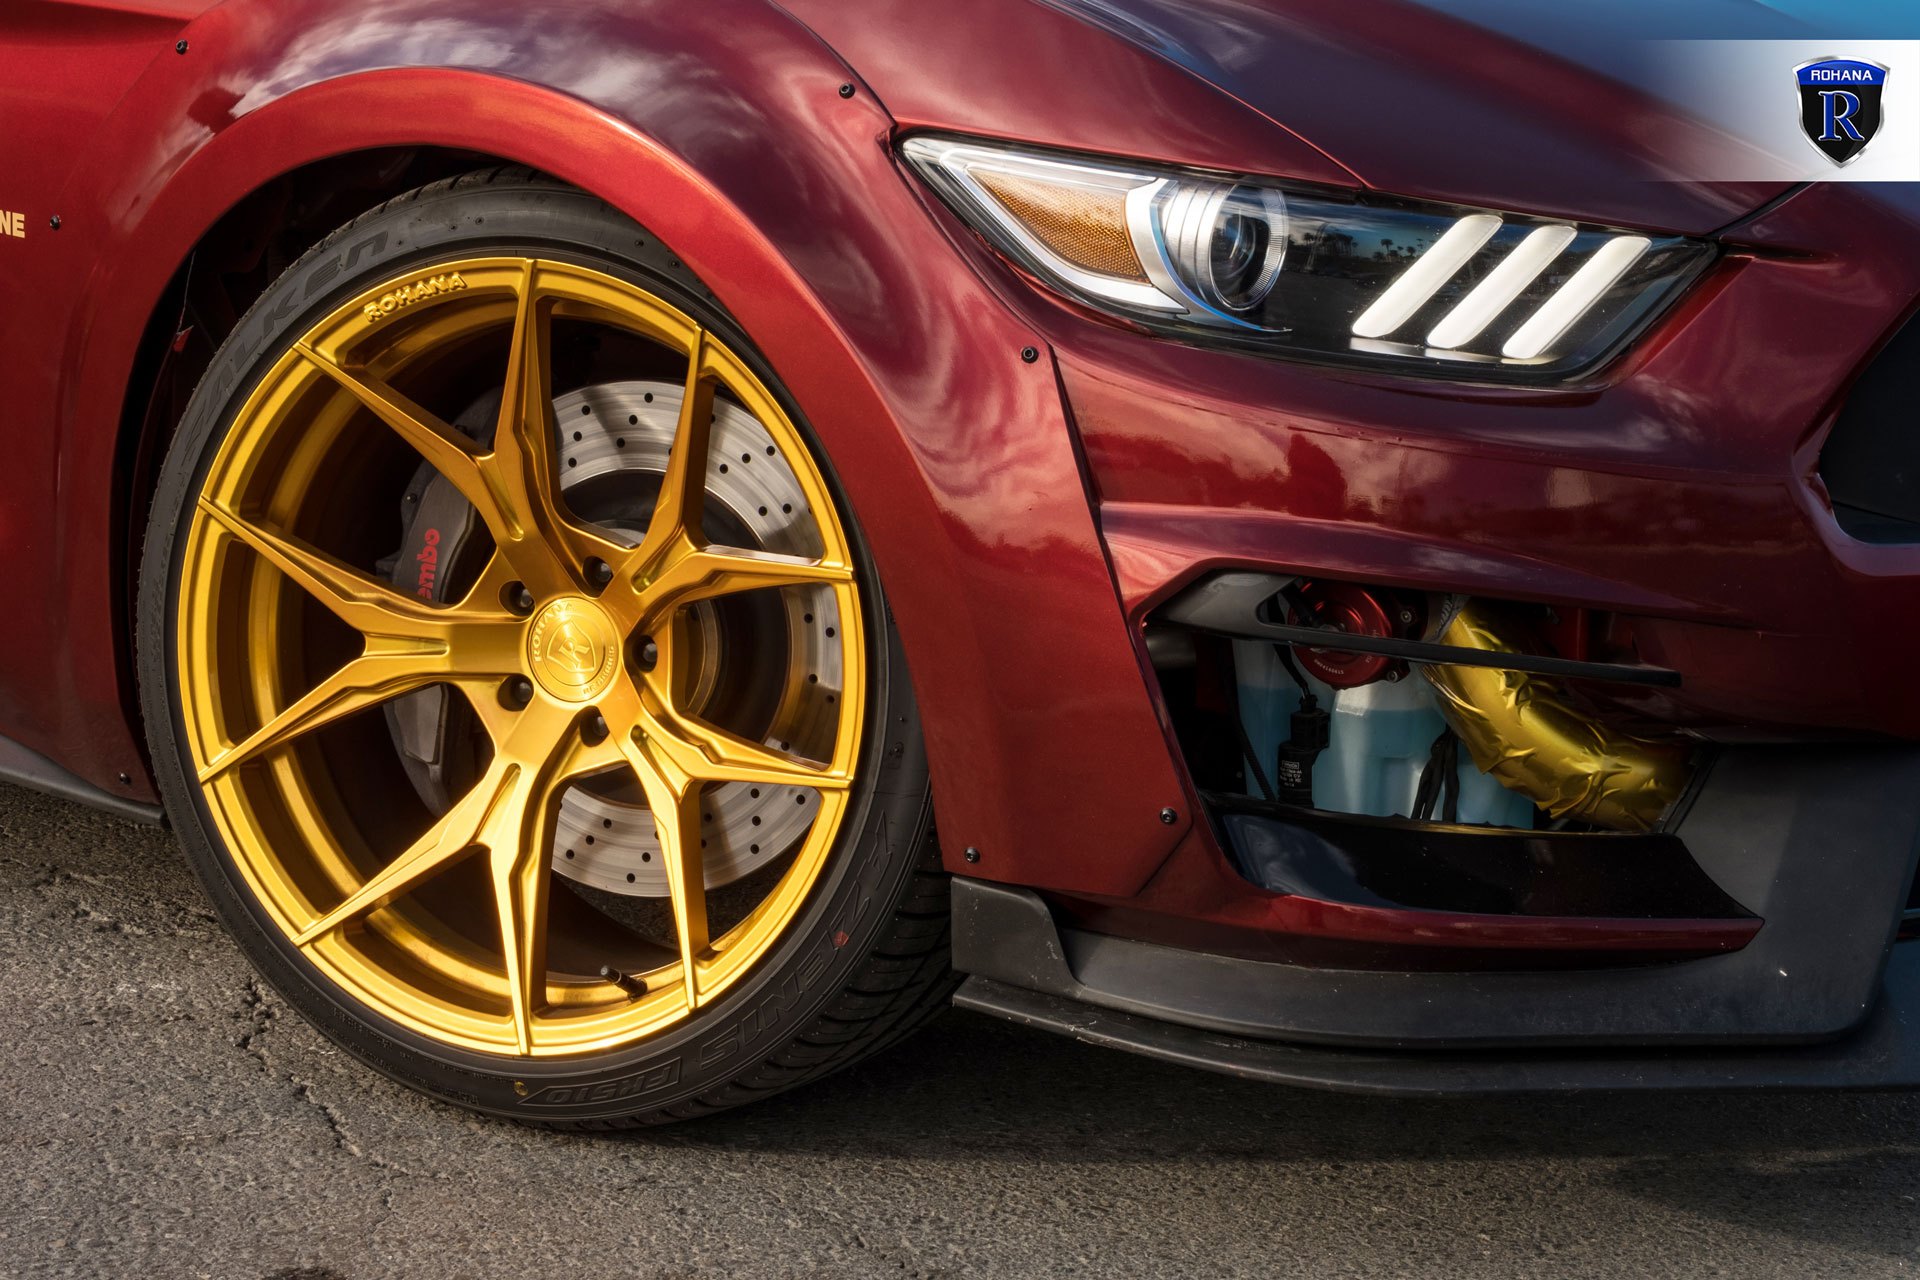 Red Debadged Ford Mustang with Falken Tires - Photo by Rohana Wheels